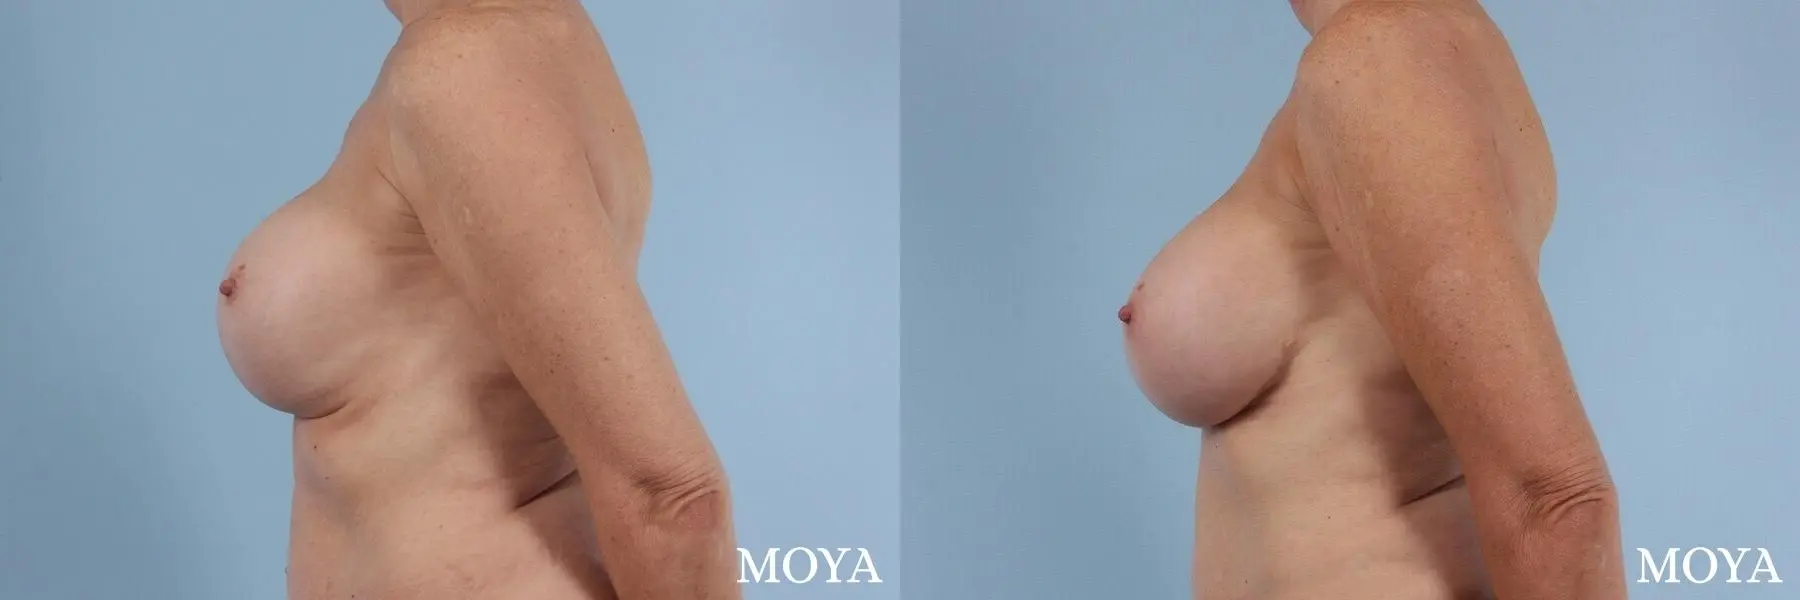 Breast Implant Exchange: Patient 6 - Before and After 2